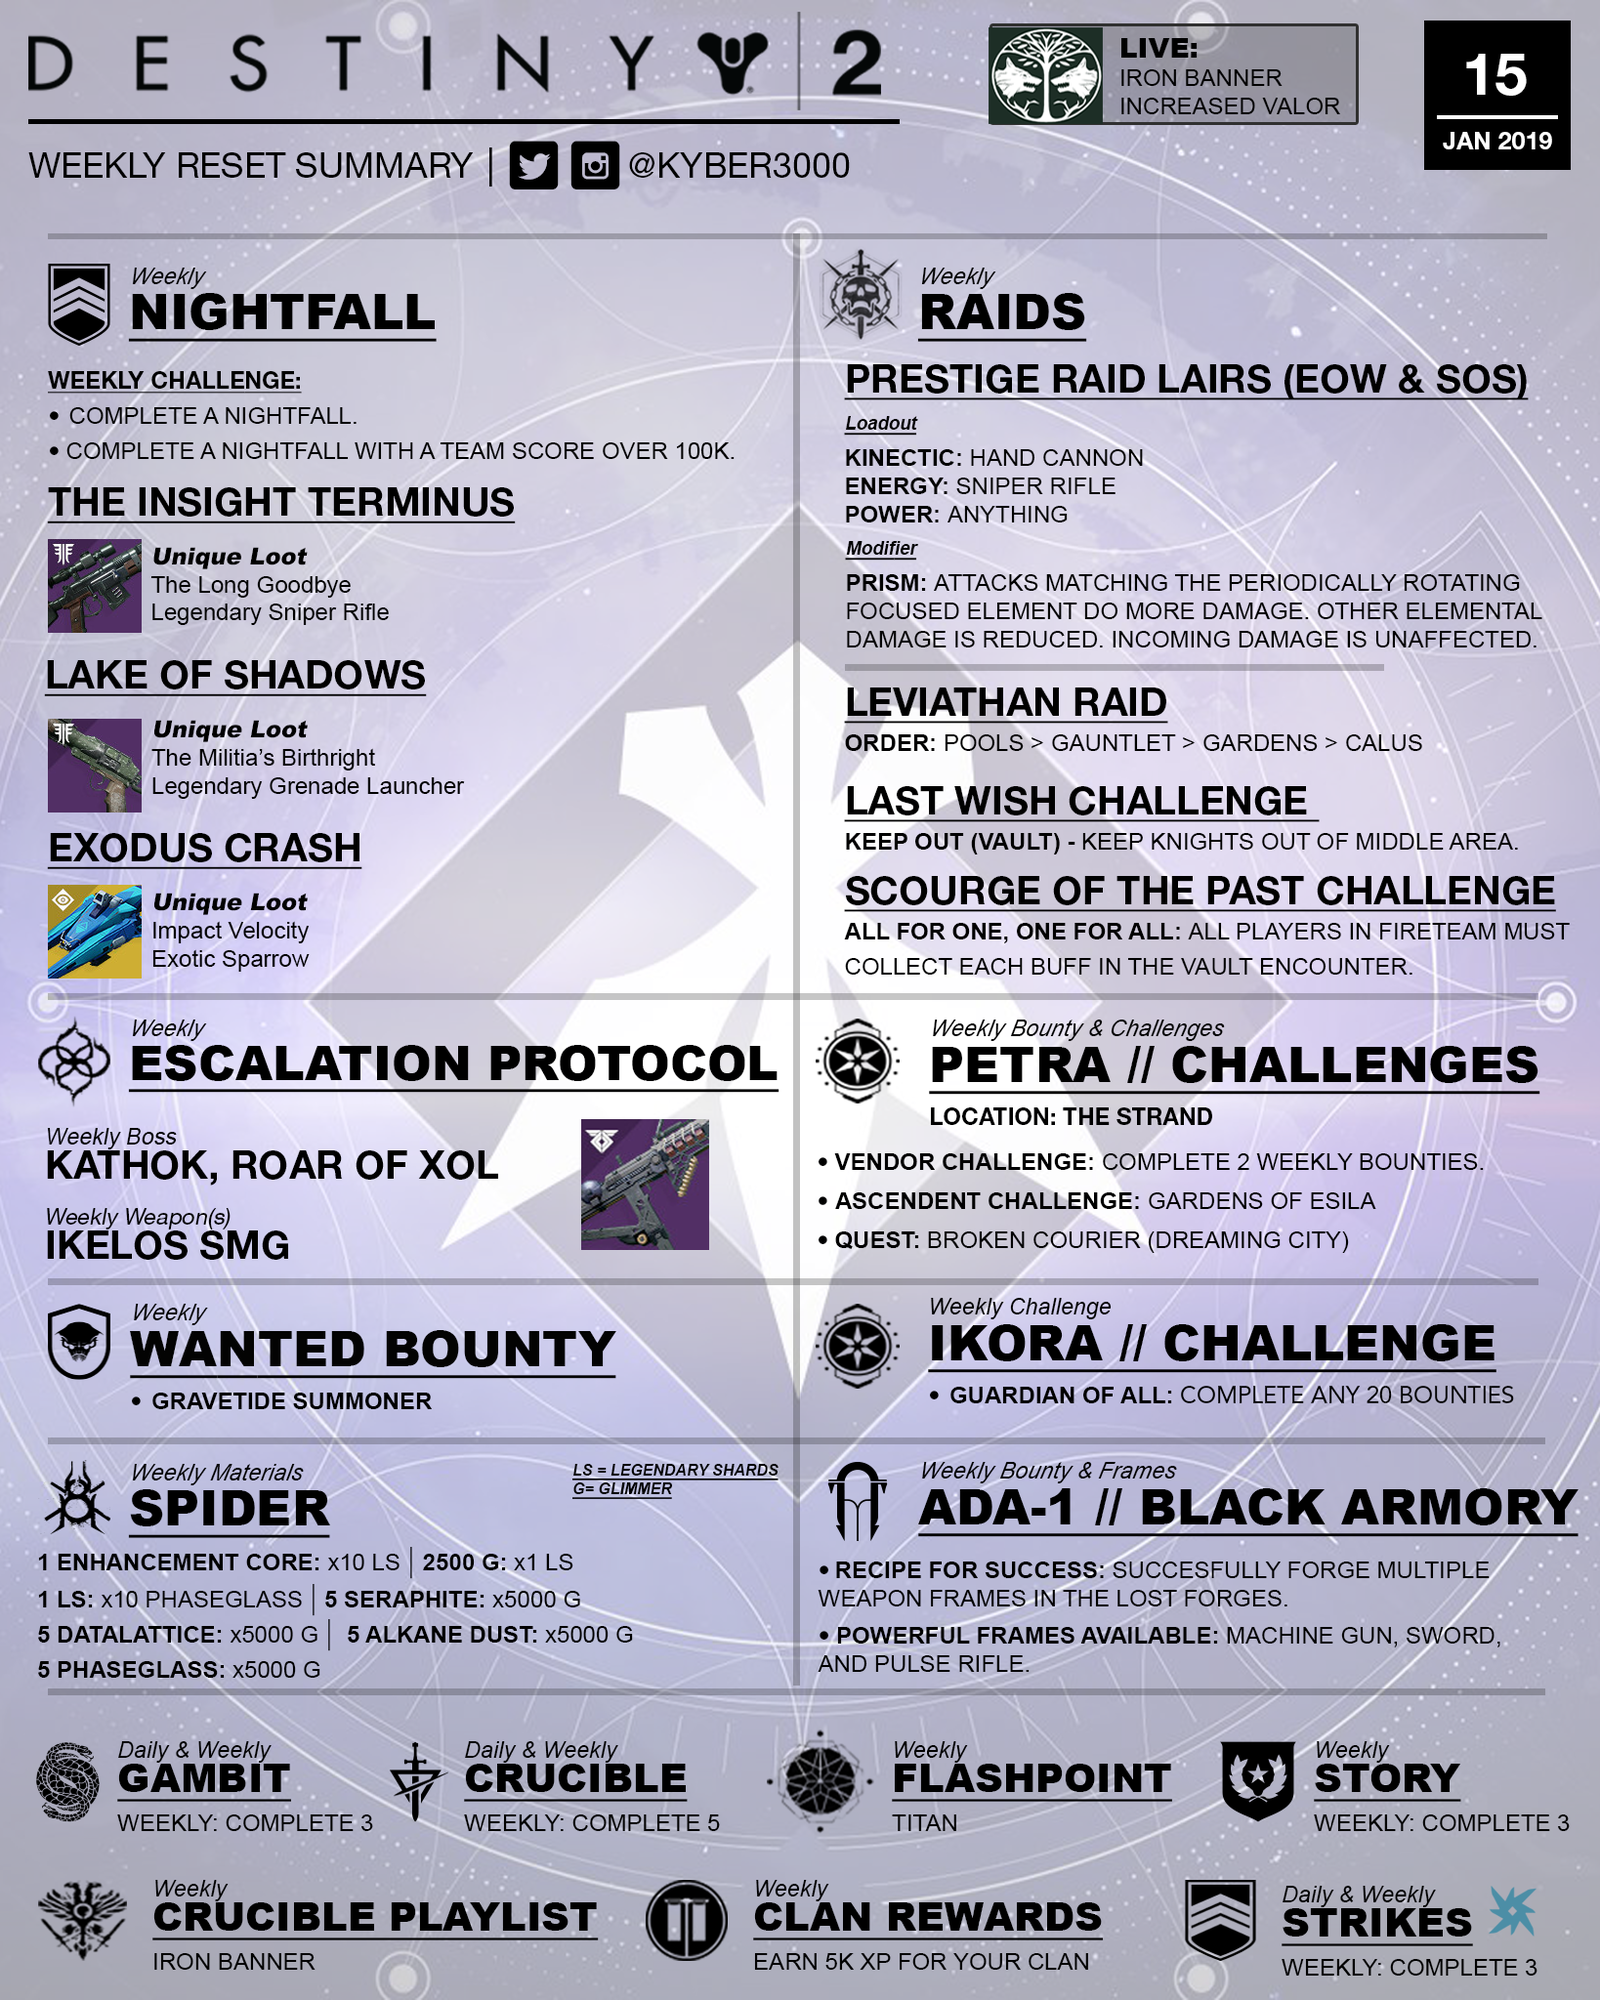 destiny-2-weekly-reset-by-kyber3000-01-15-19-1.png